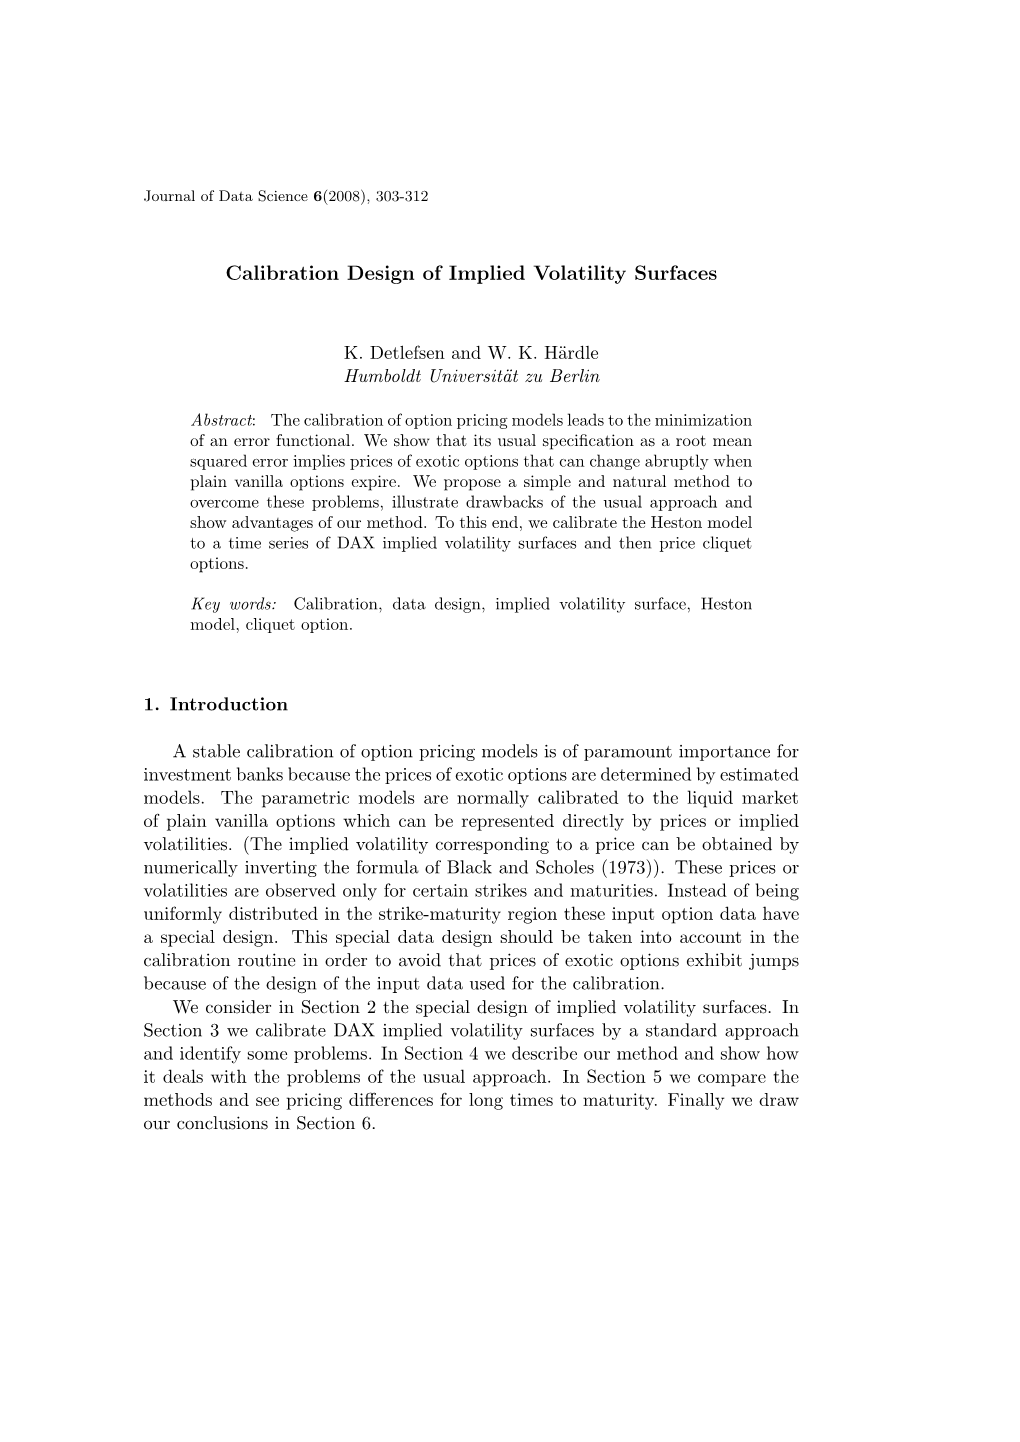 Calibration Design of Implied Volatility Surfaces